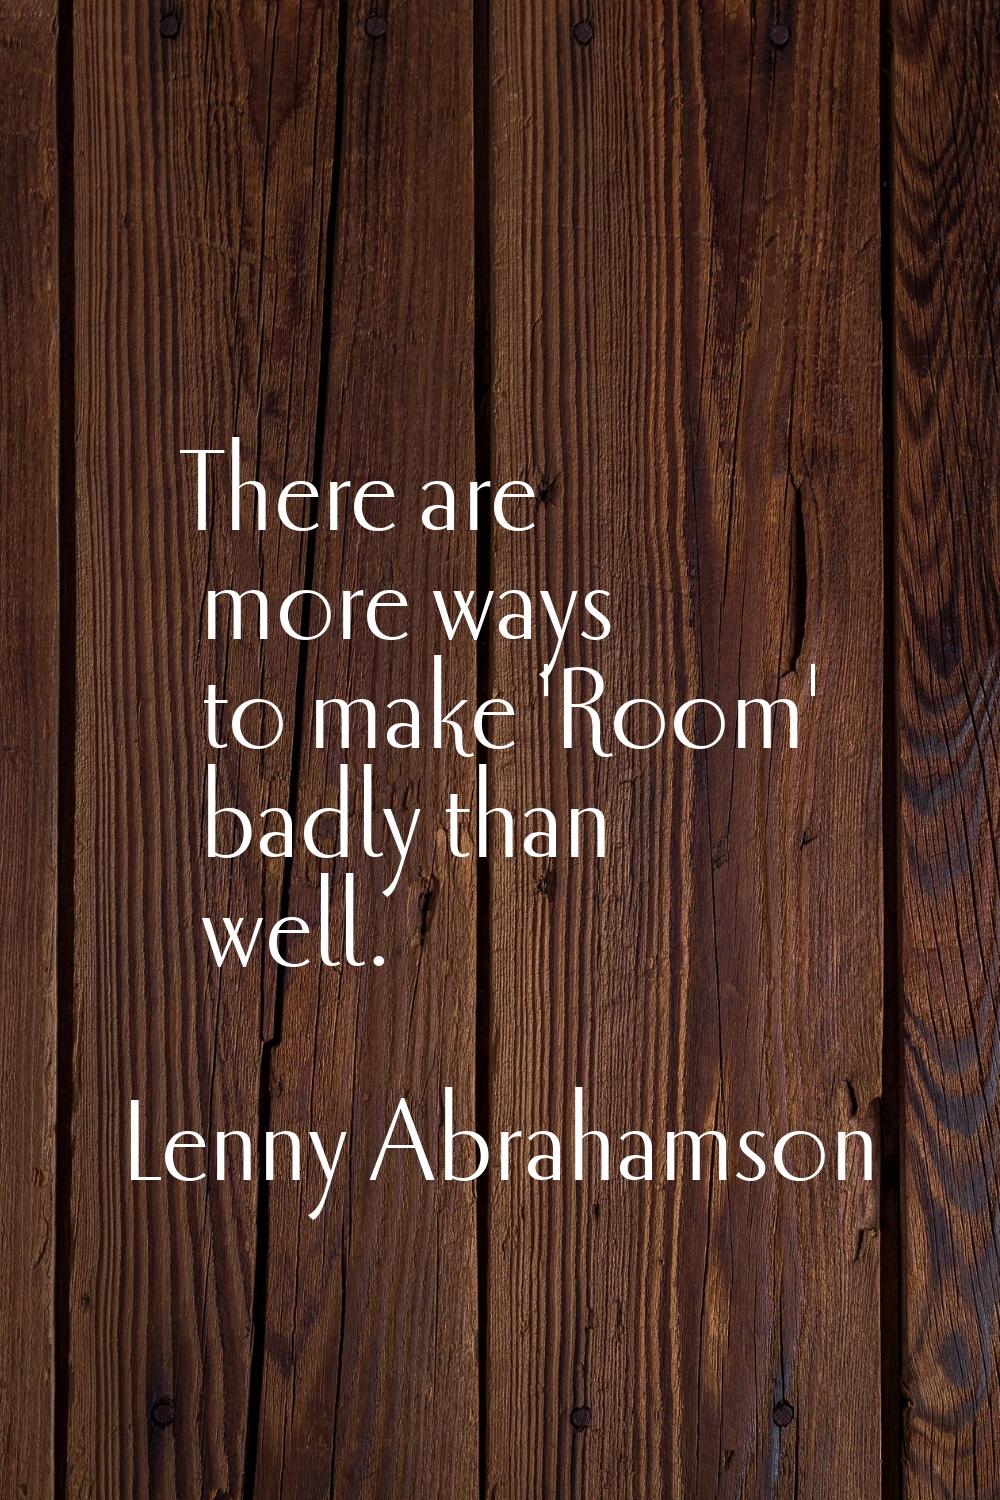 There are more ways to make 'Room' badly than well.